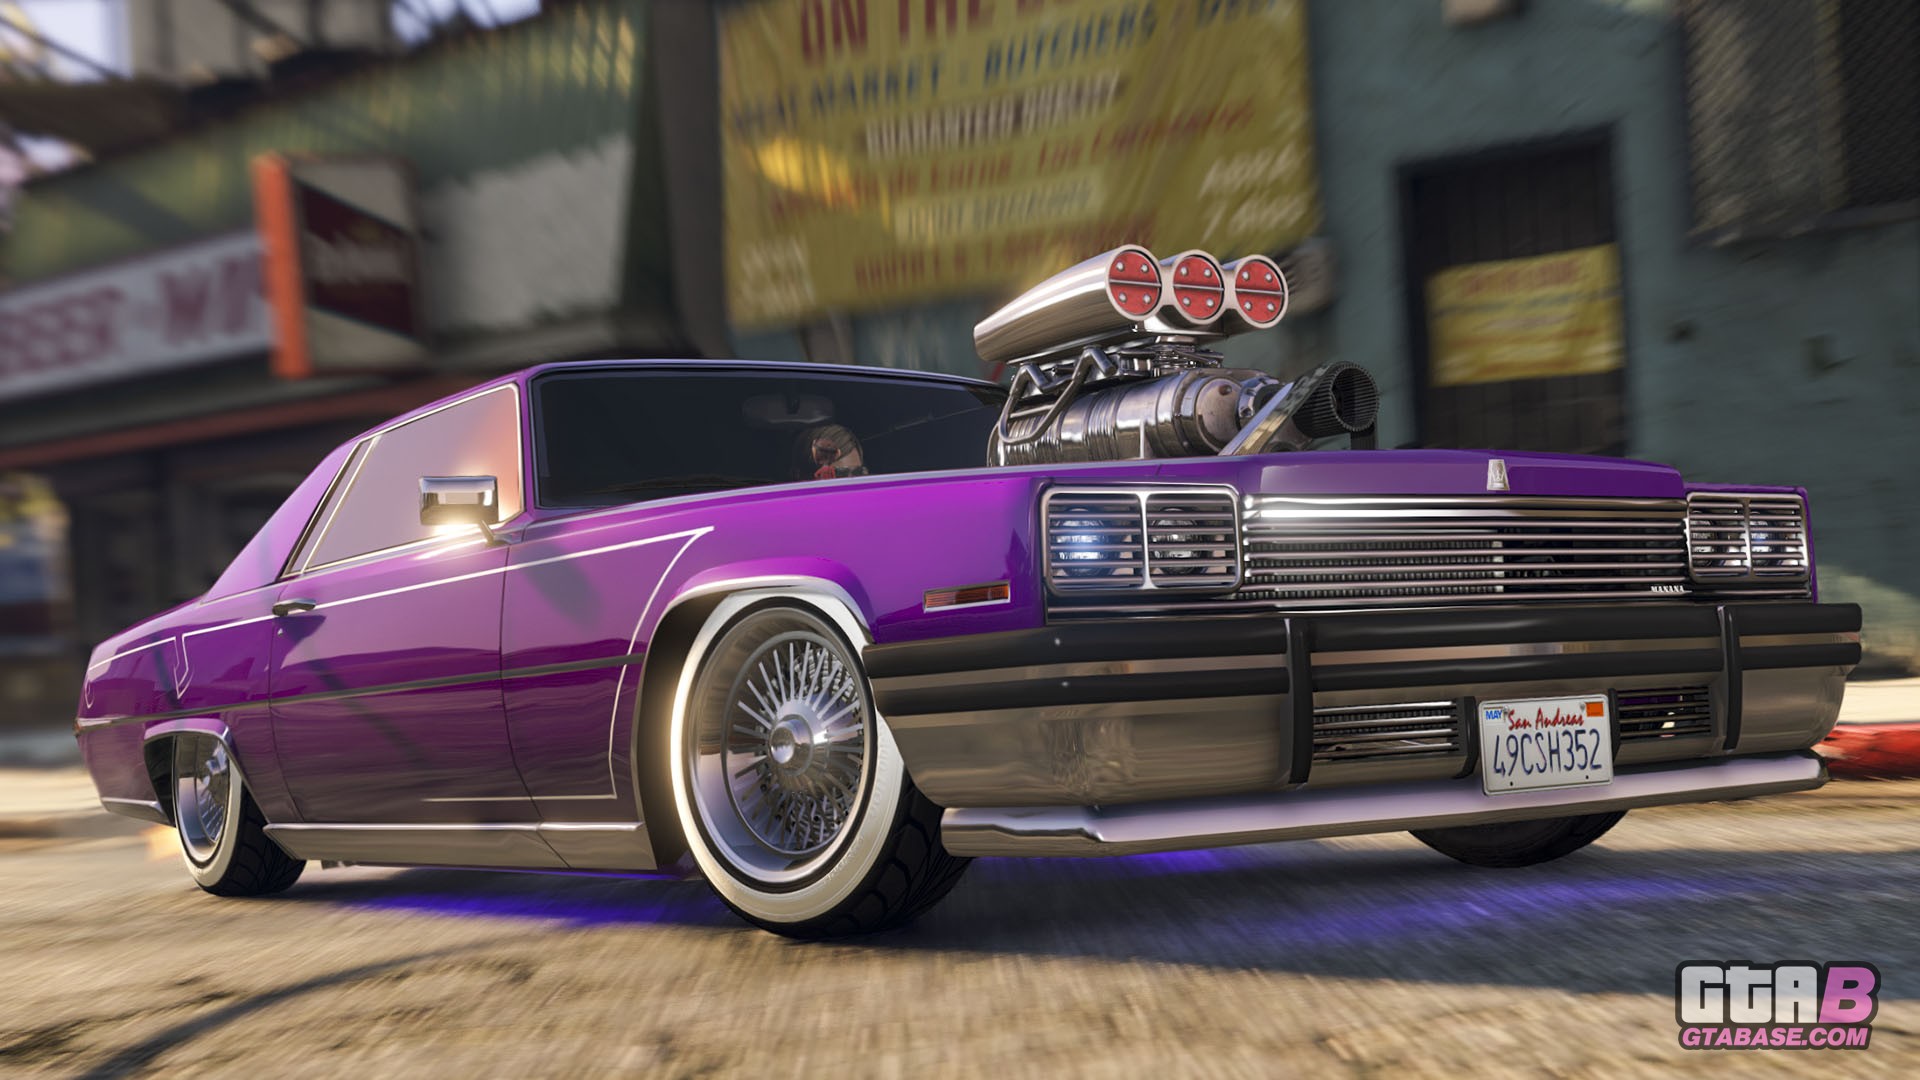 What are the Latest Cars in Gta 5: Price and How to Buy.